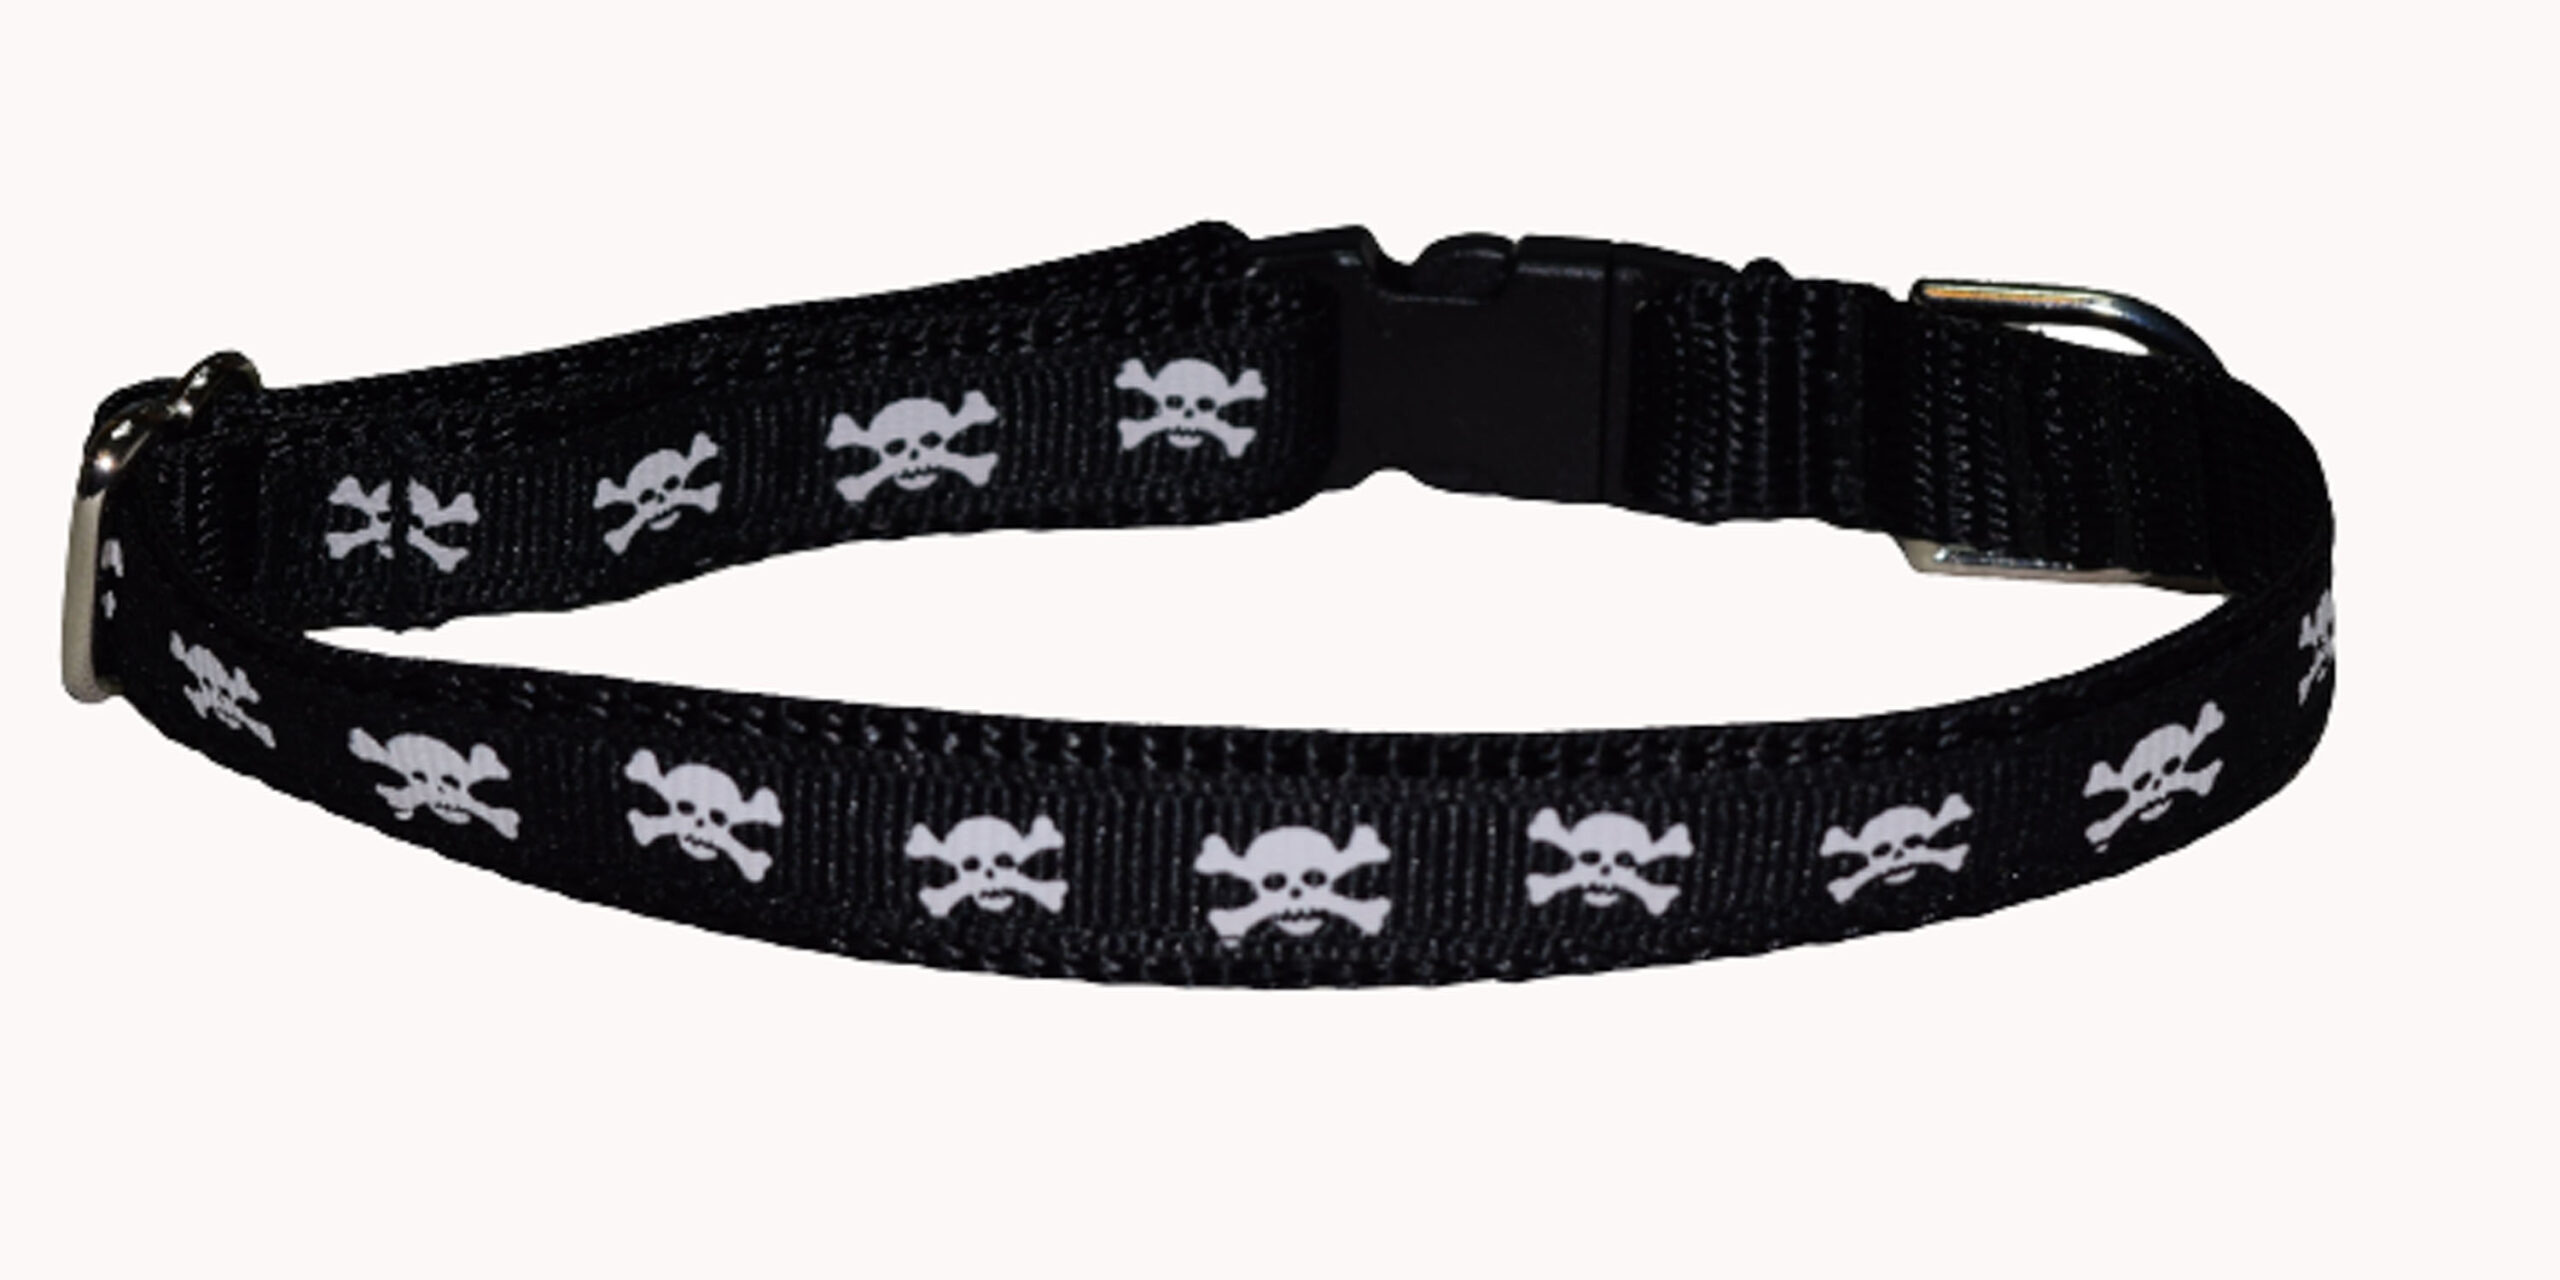 Skull and Crossbones Wholesale Dog and Cat Collars